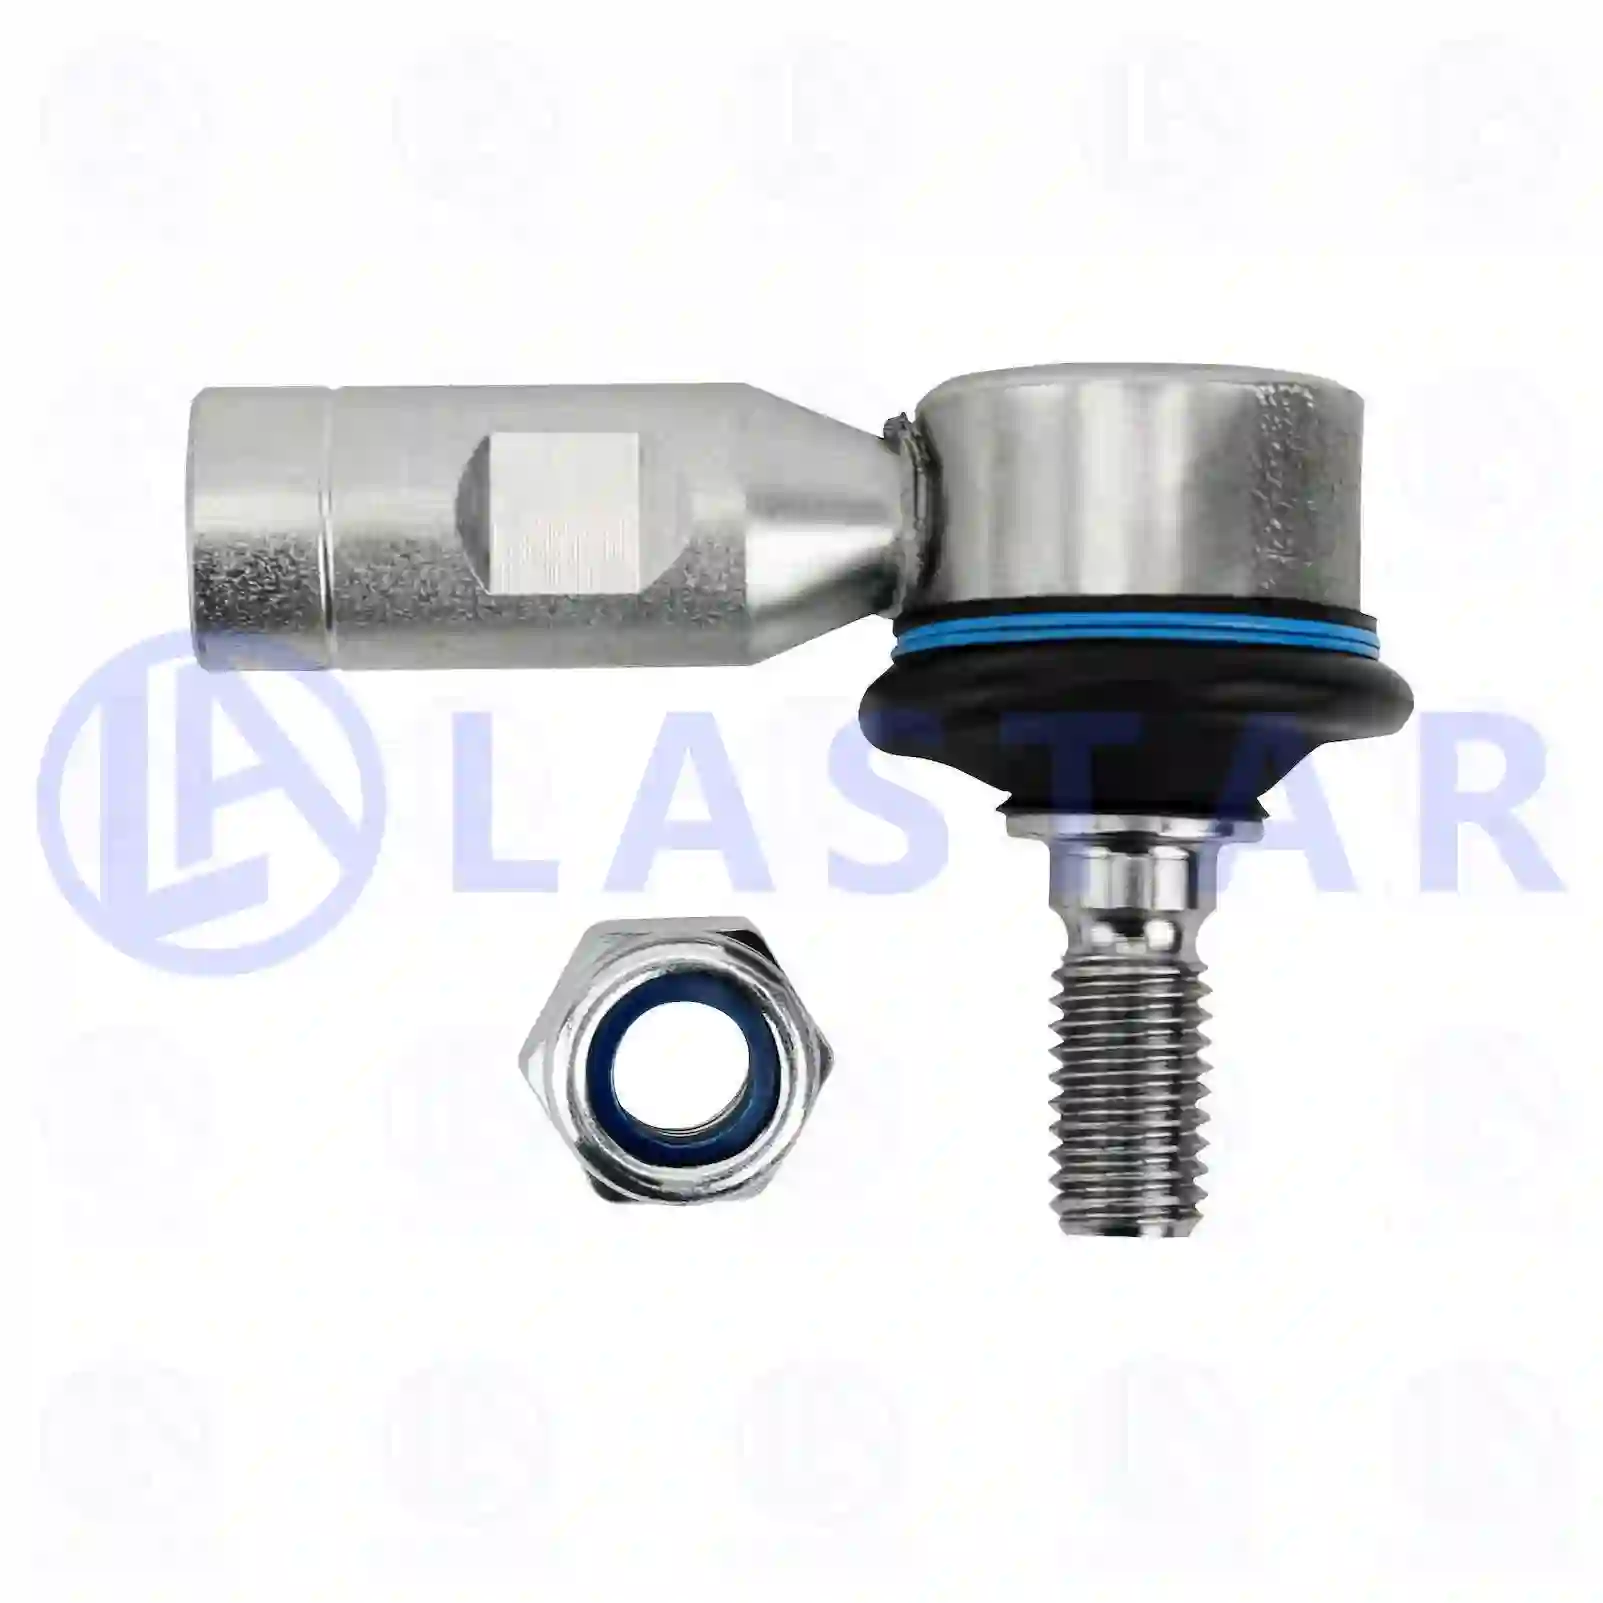 Ball joint, left hand thread, 77732037, 0009960445, 0009965145, 0009965645, 0009967645, 0019963145, 3849960245, ZG40136-0008 ||  77732037 Lastar Spare Part | Truck Spare Parts, Auotomotive Spare Parts Ball joint, left hand thread, 77732037, 0009960445, 0009965145, 0009965645, 0009967645, 0019963145, 3849960245, ZG40136-0008 ||  77732037 Lastar Spare Part | Truck Spare Parts, Auotomotive Spare Parts